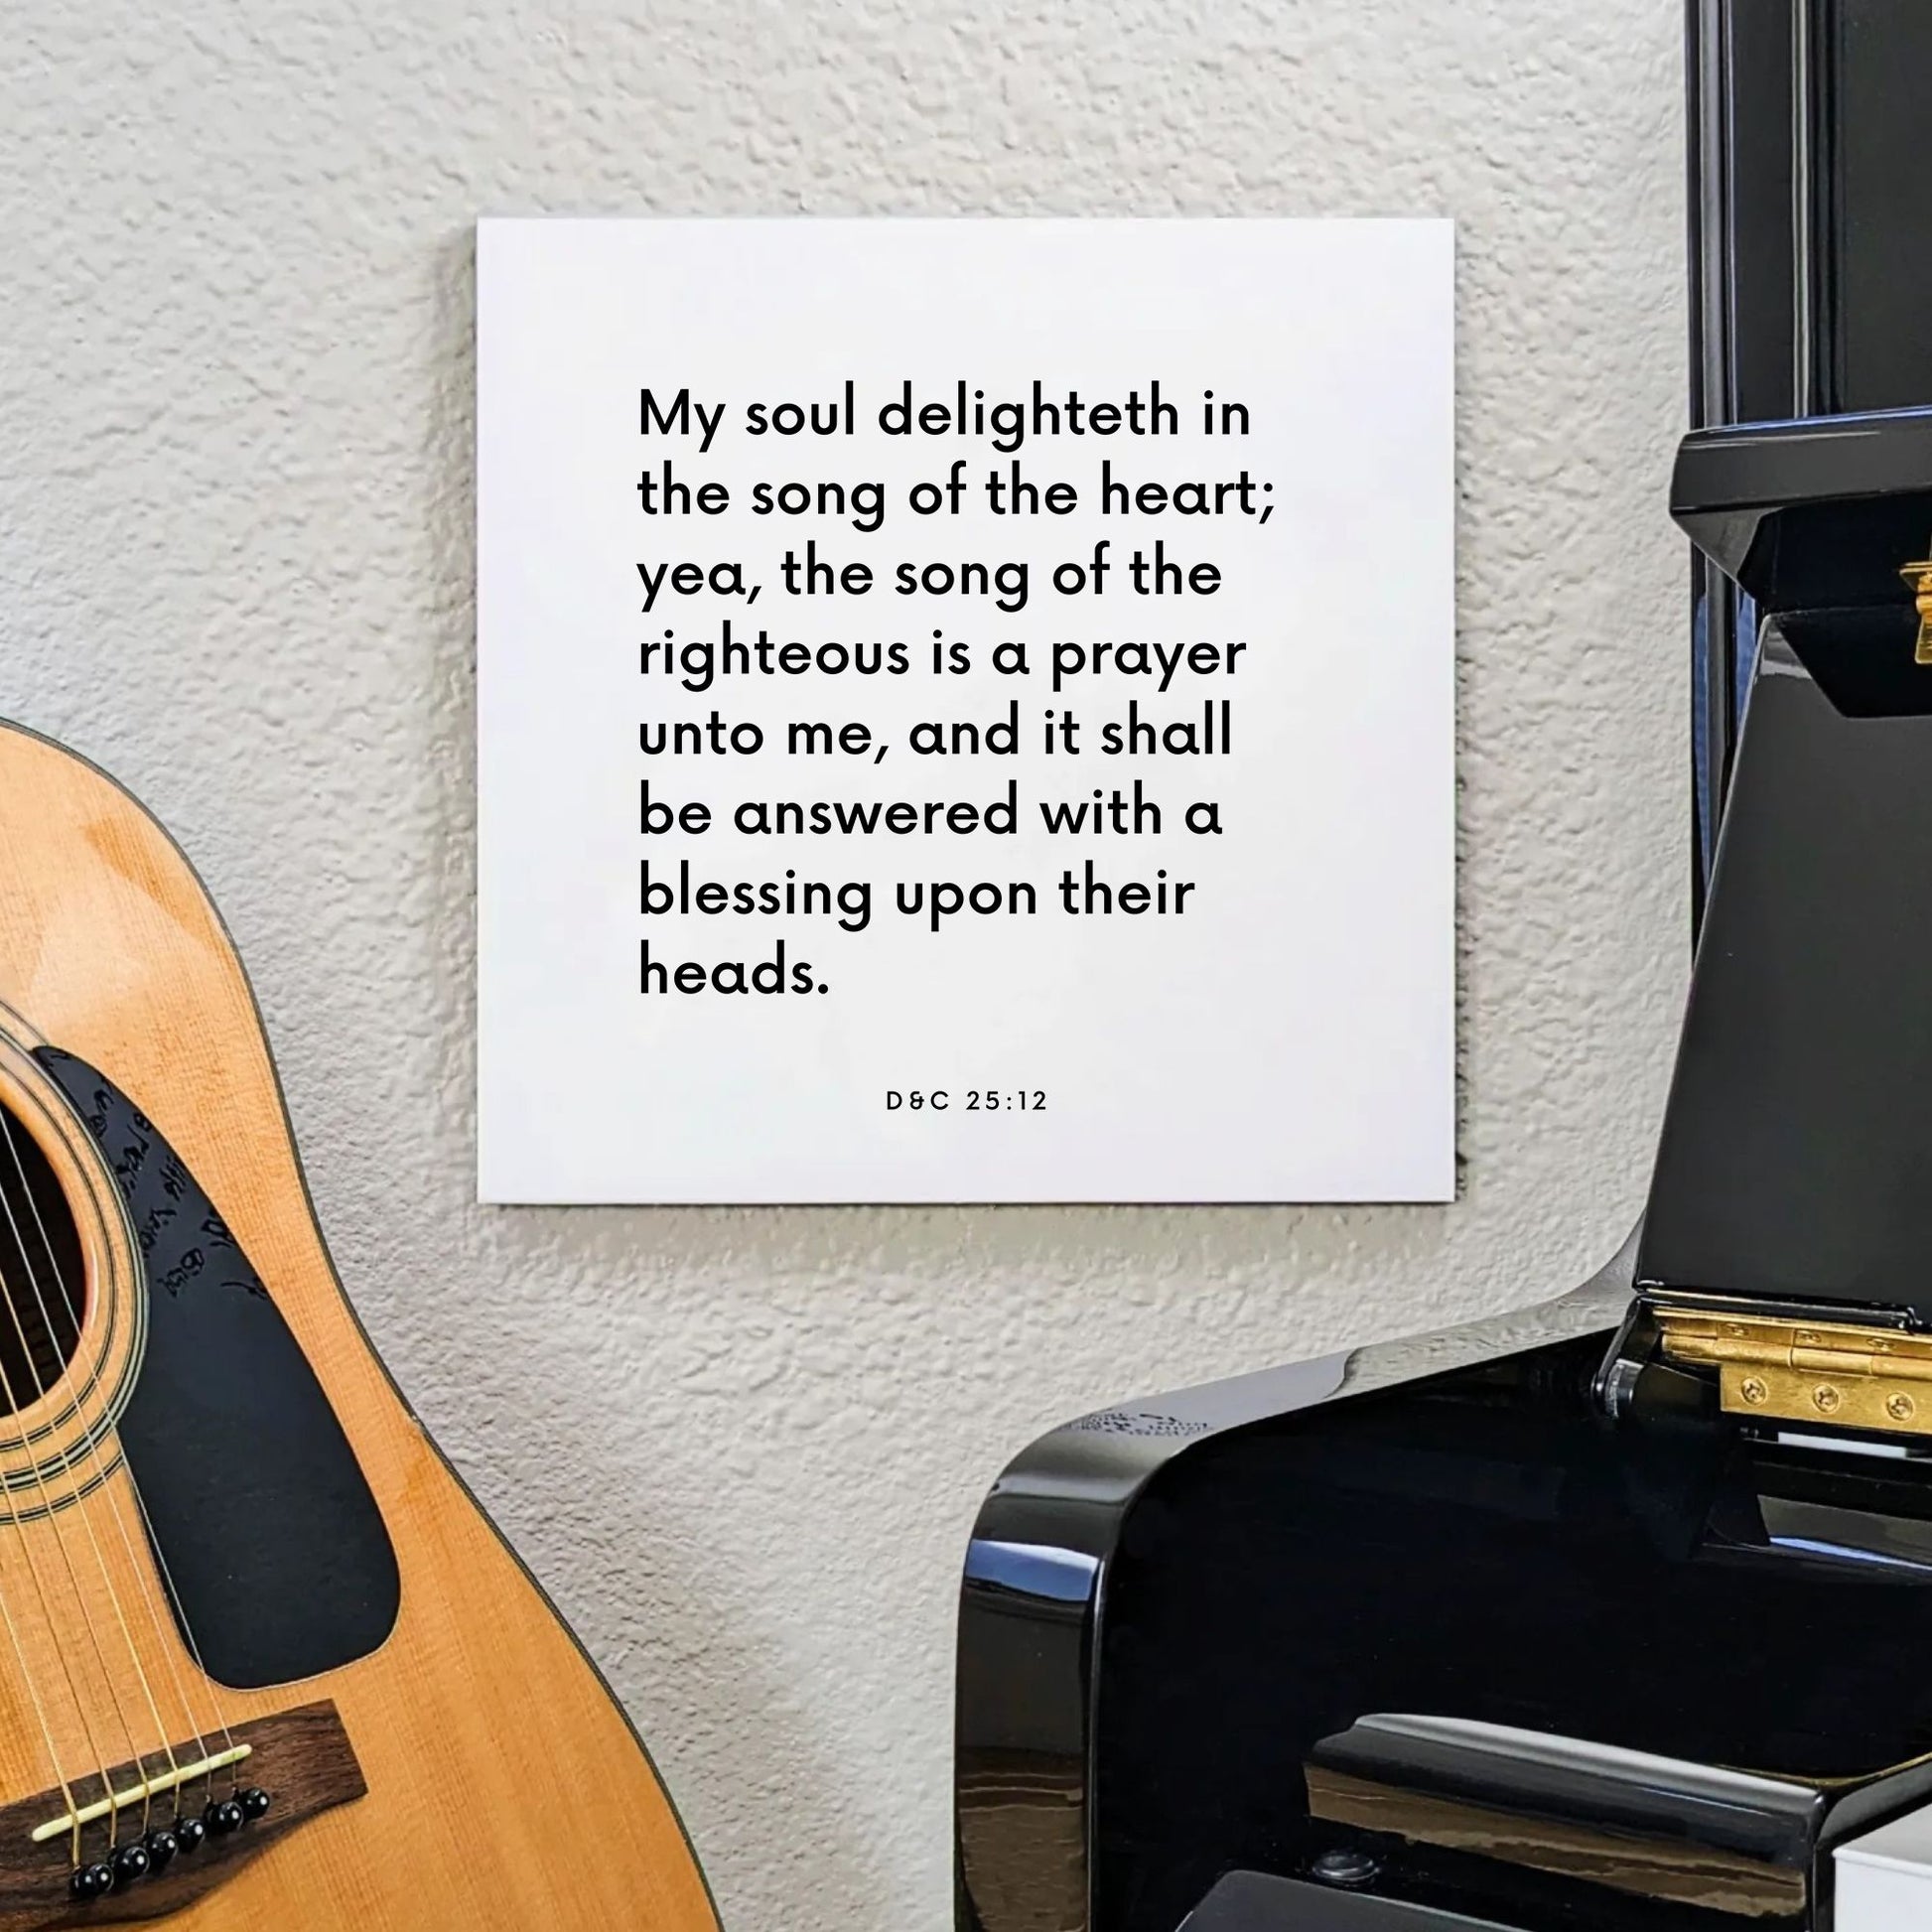 Music mouting of the scripture tile for D&C 25:12 - "The song of the righteous is a prayer unto me"